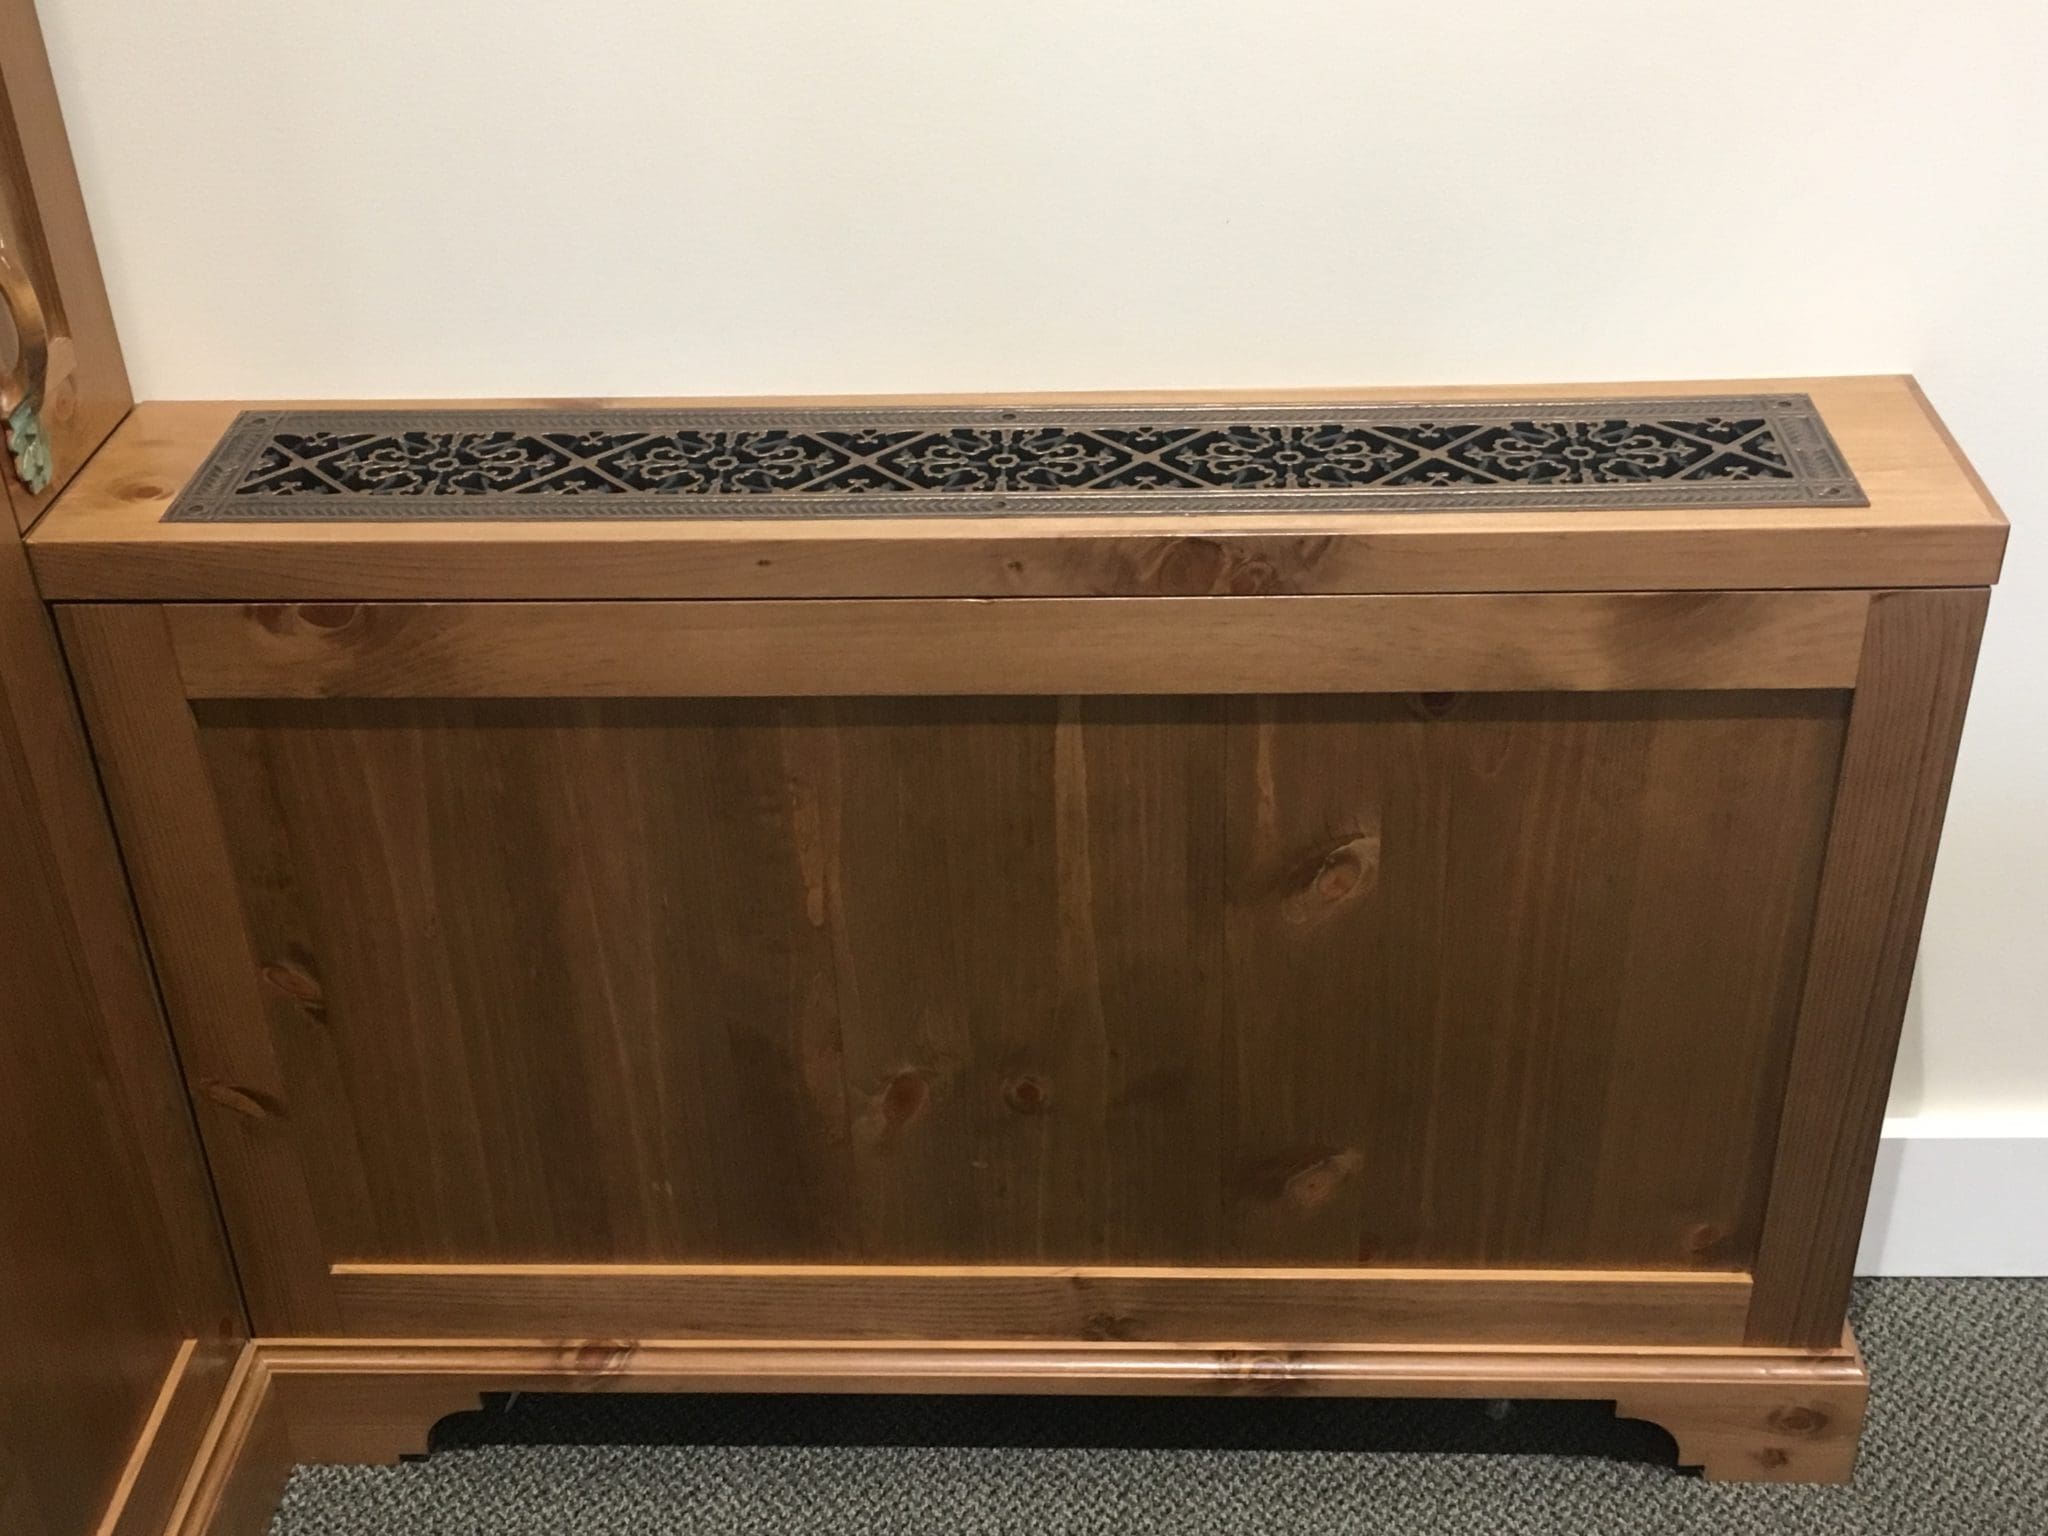 Radiator Cover Grille in Craftsman Style Arts and Crafts.